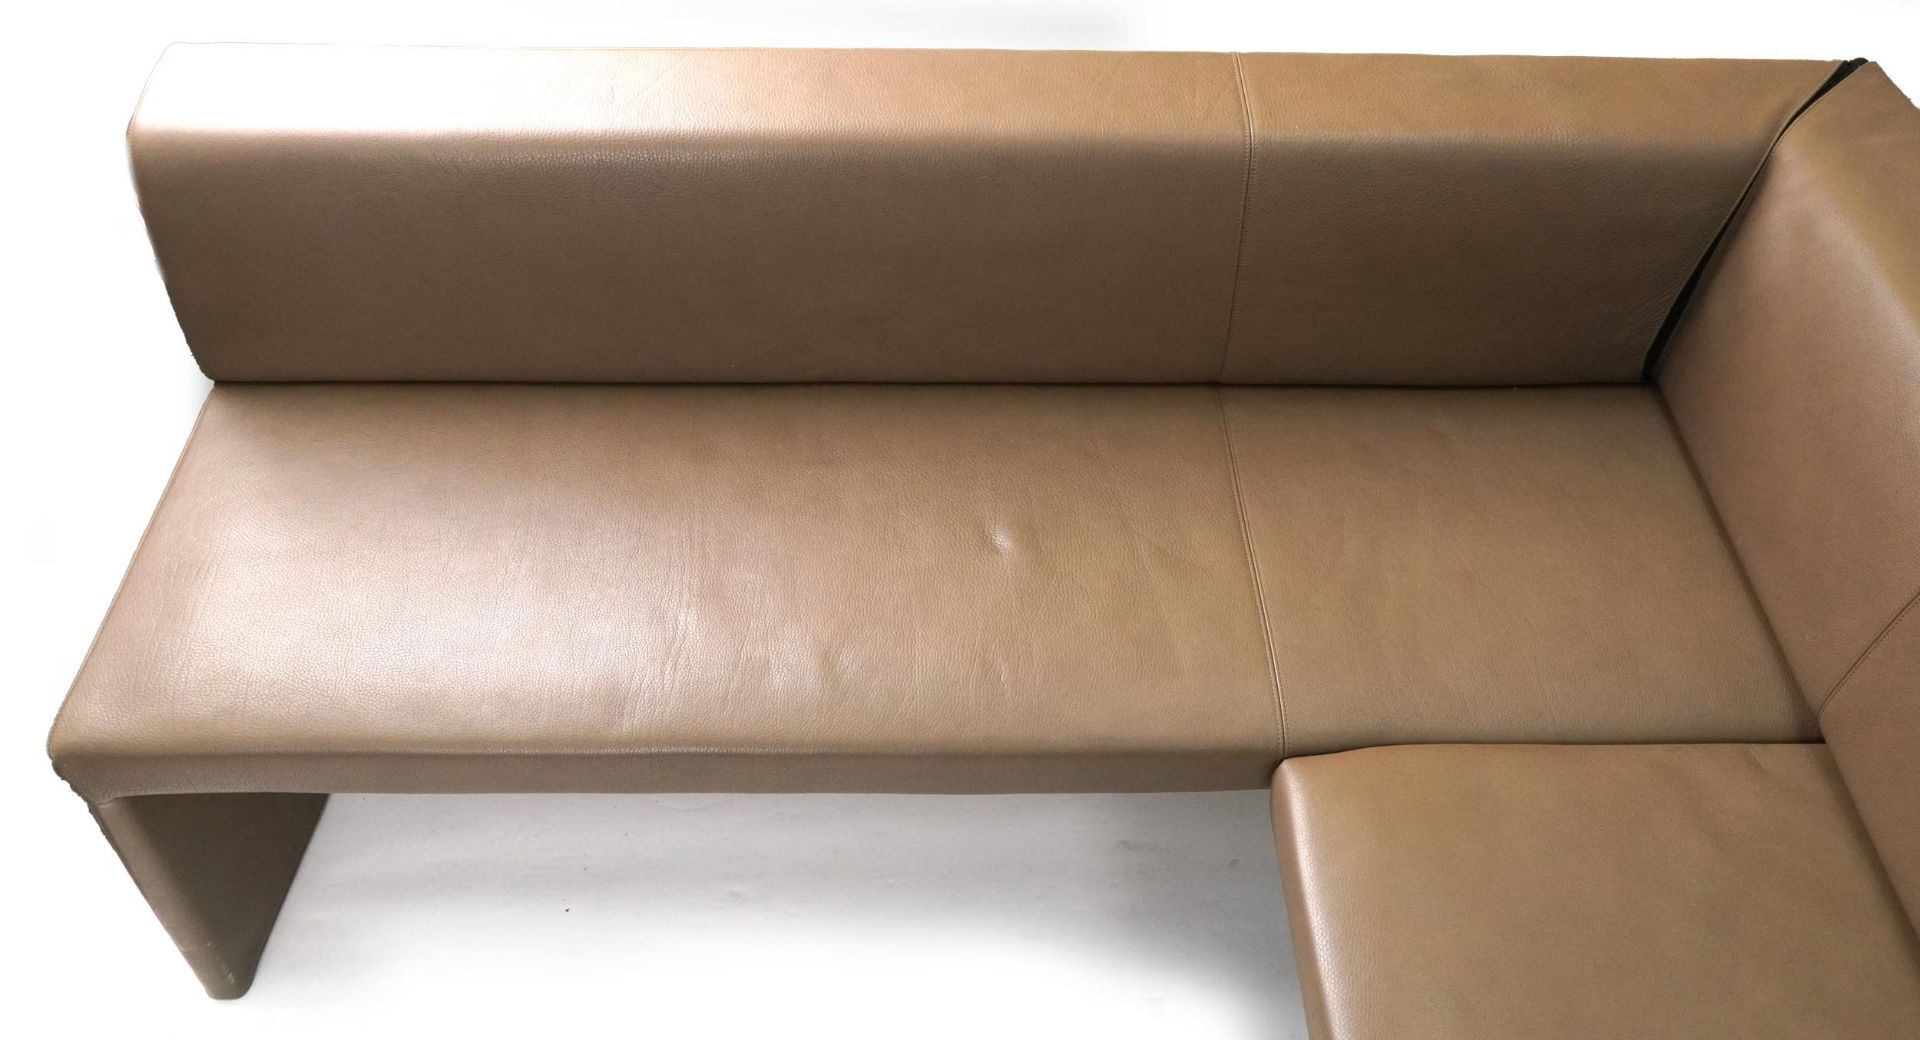 Contemporary Walter Knoll 290 corner seat bench settee with caffe latte leather upholstery, 77cm H x - Image 3 of 7